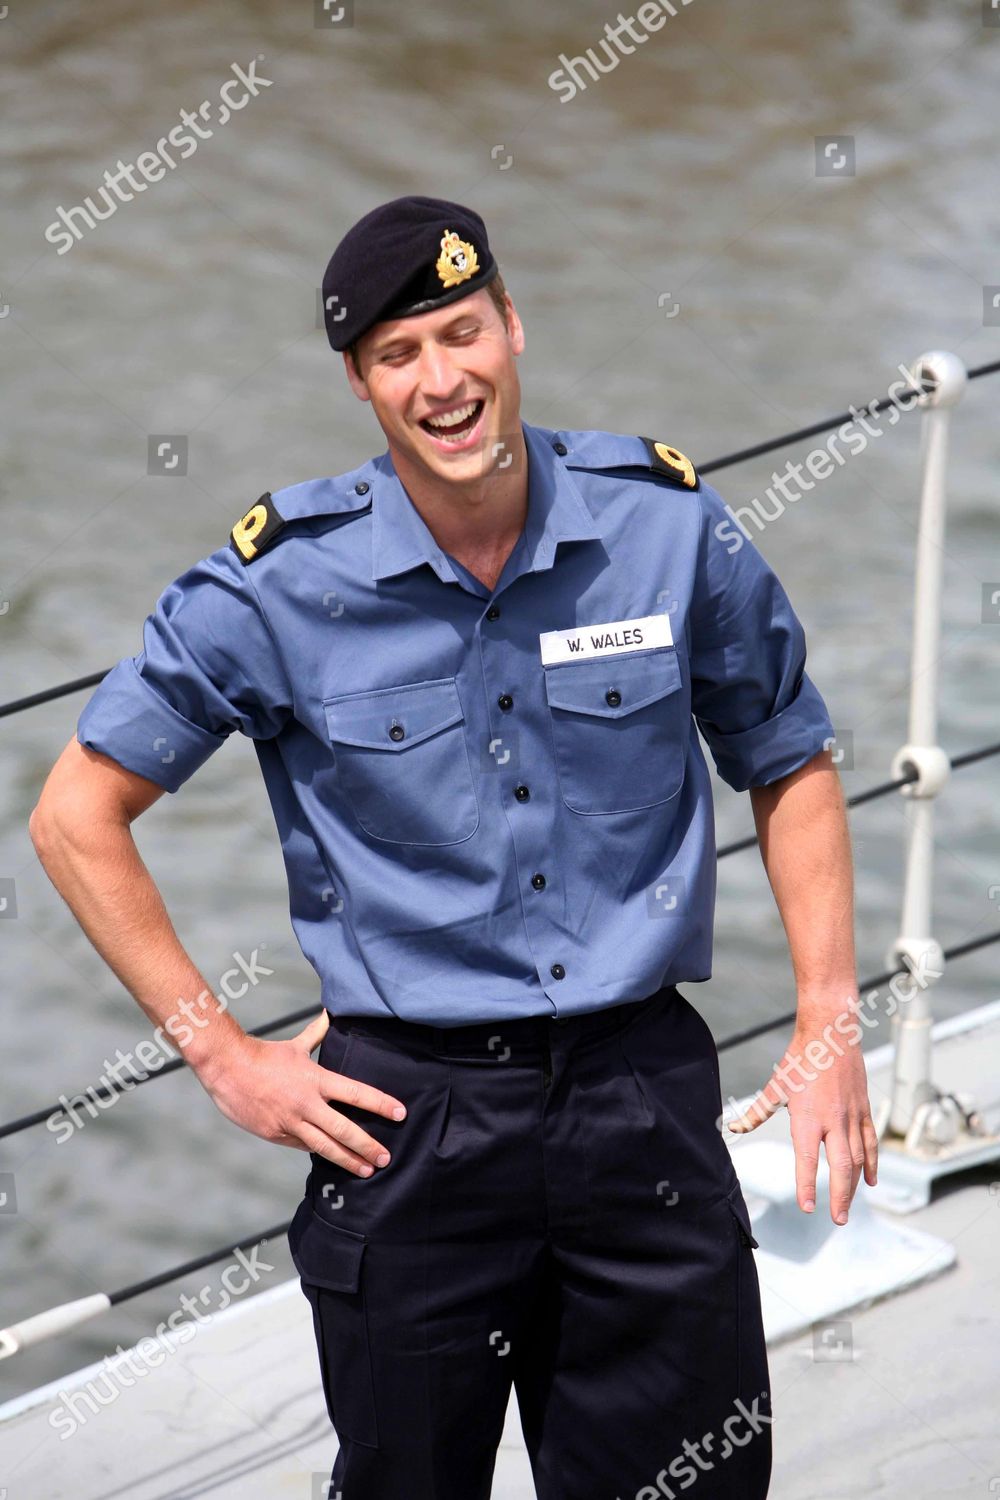 prince-william-training-with-the-royal-navy-at-britannia-royal-naval-college-dartmouth-britain-shutterstock-editorial-767070n.jpg